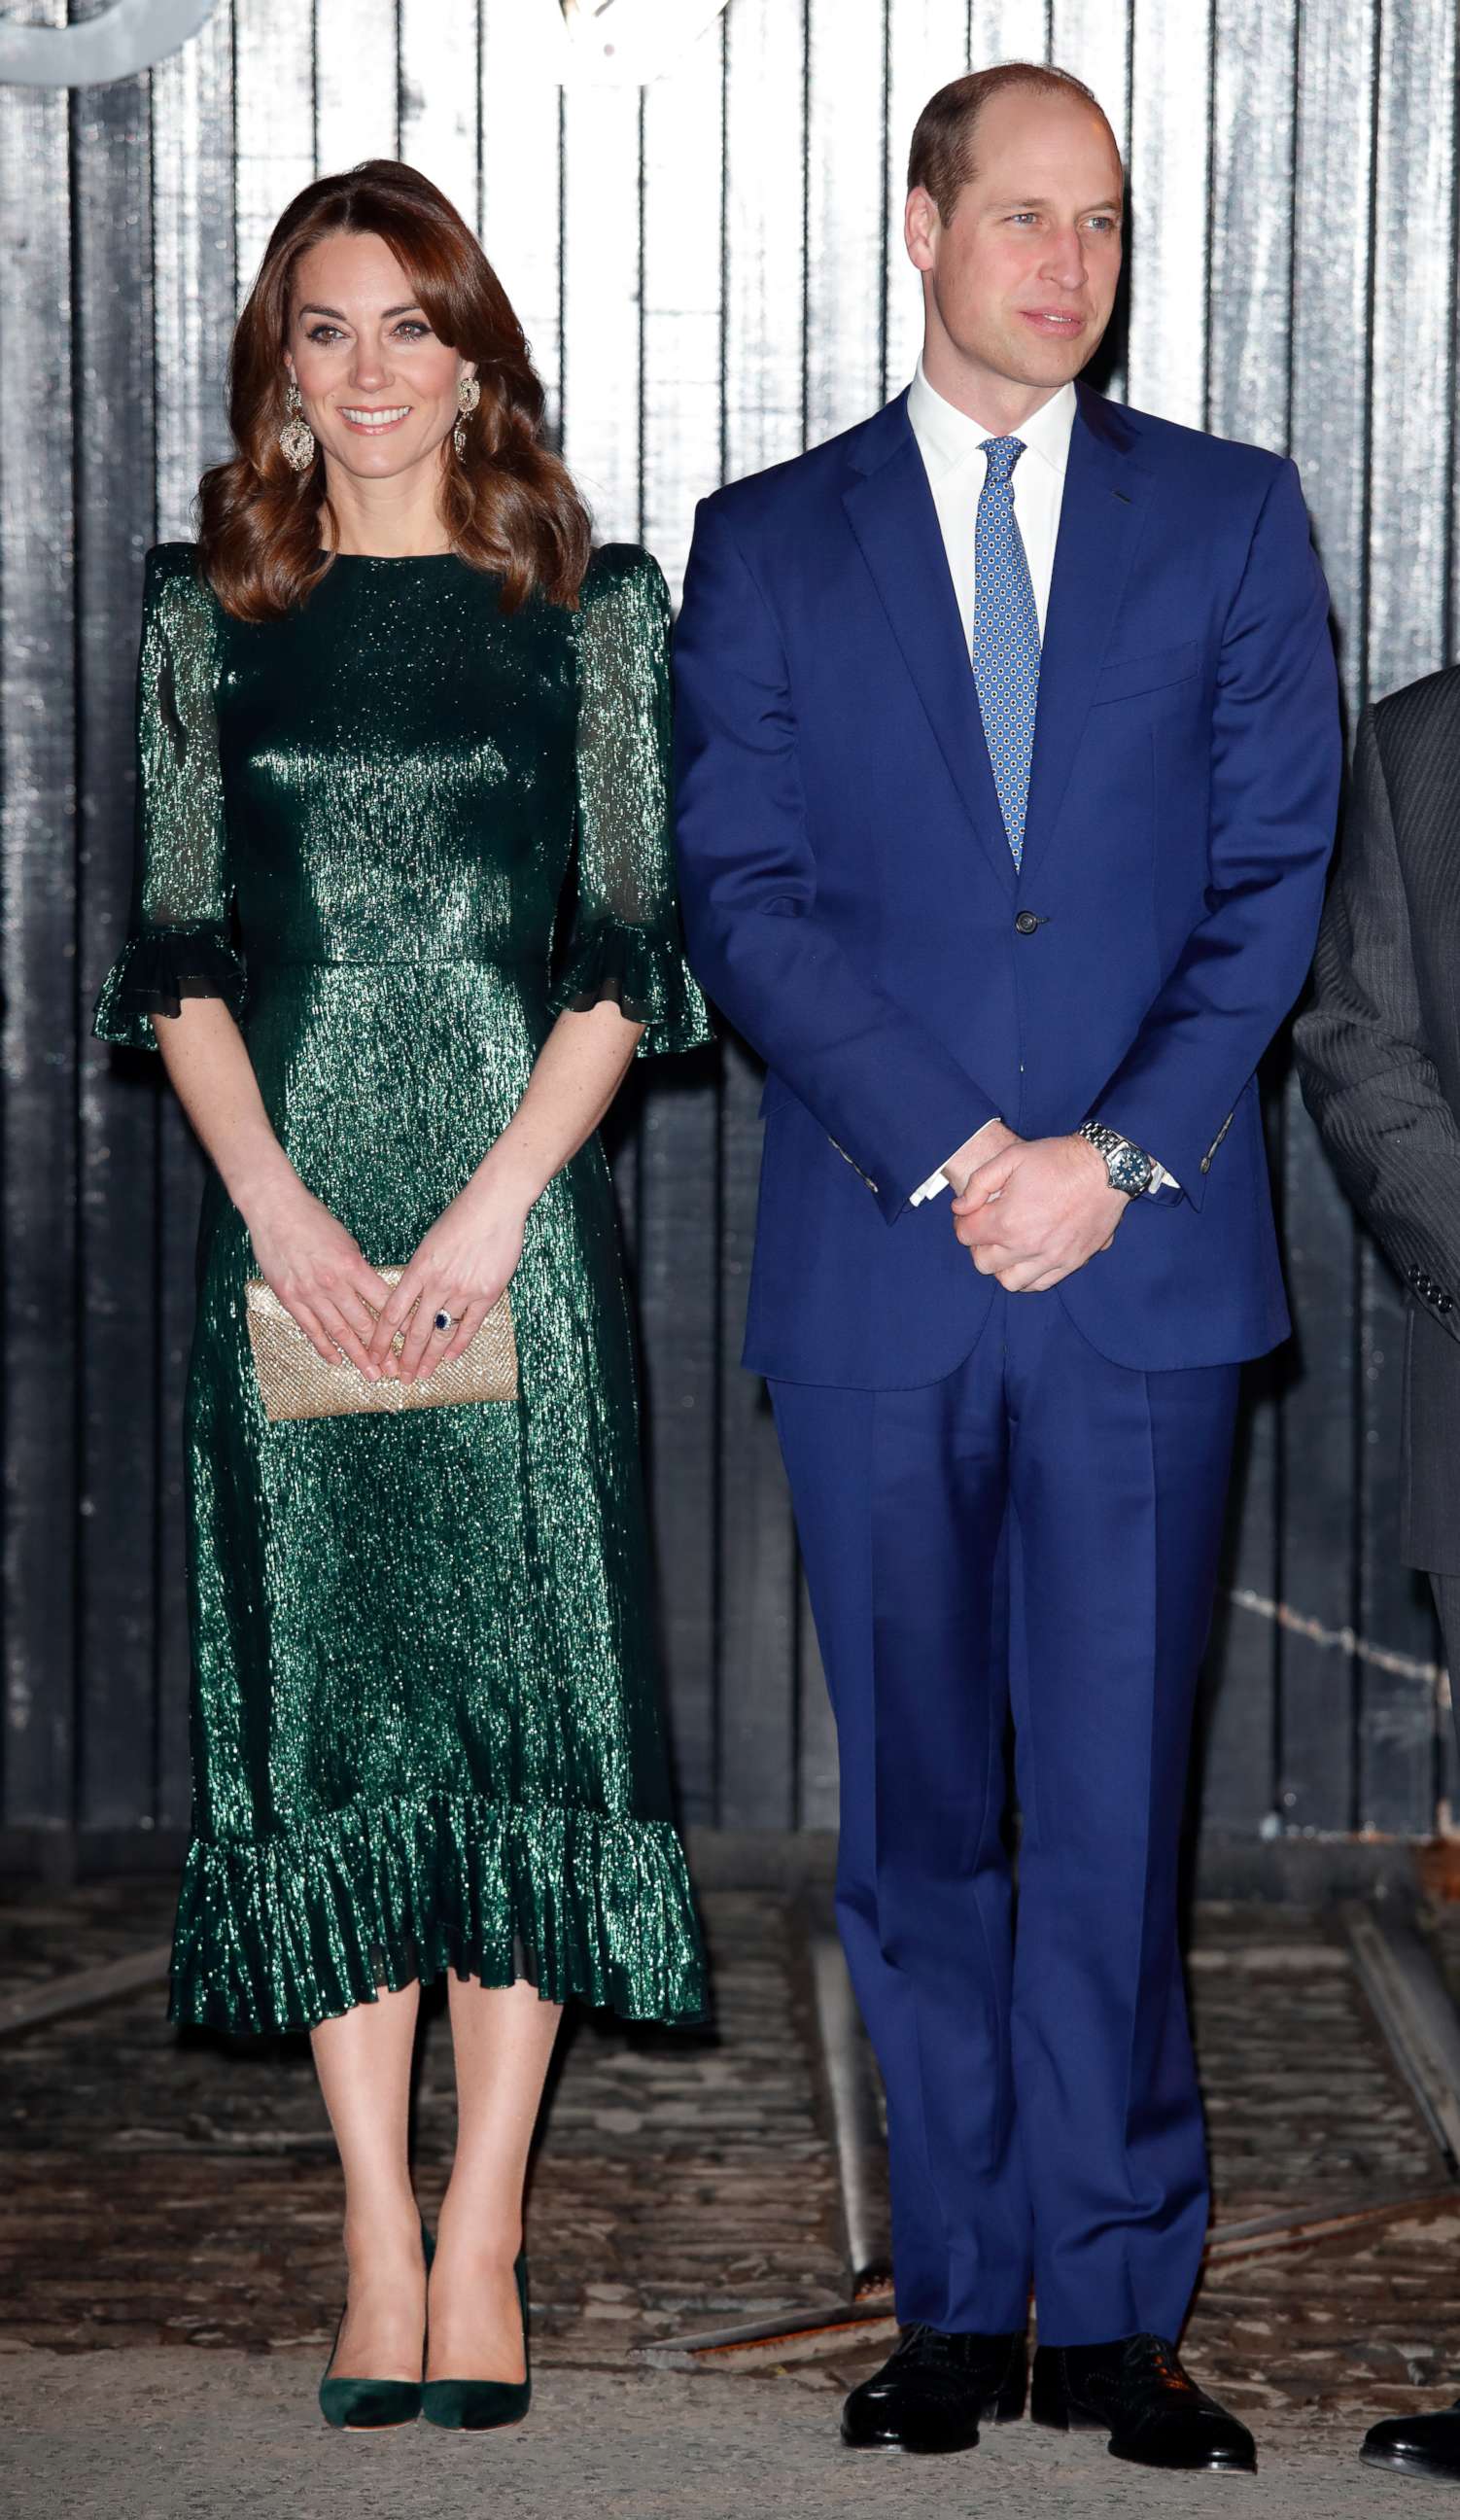 PHOTO: Catherine, Duchess of Cambridge and Prince William, Duke of Cambridge attend a reception at the Guinness Storehouse"u2019s Gravity Bar, March 3, 2020 in Dublin.